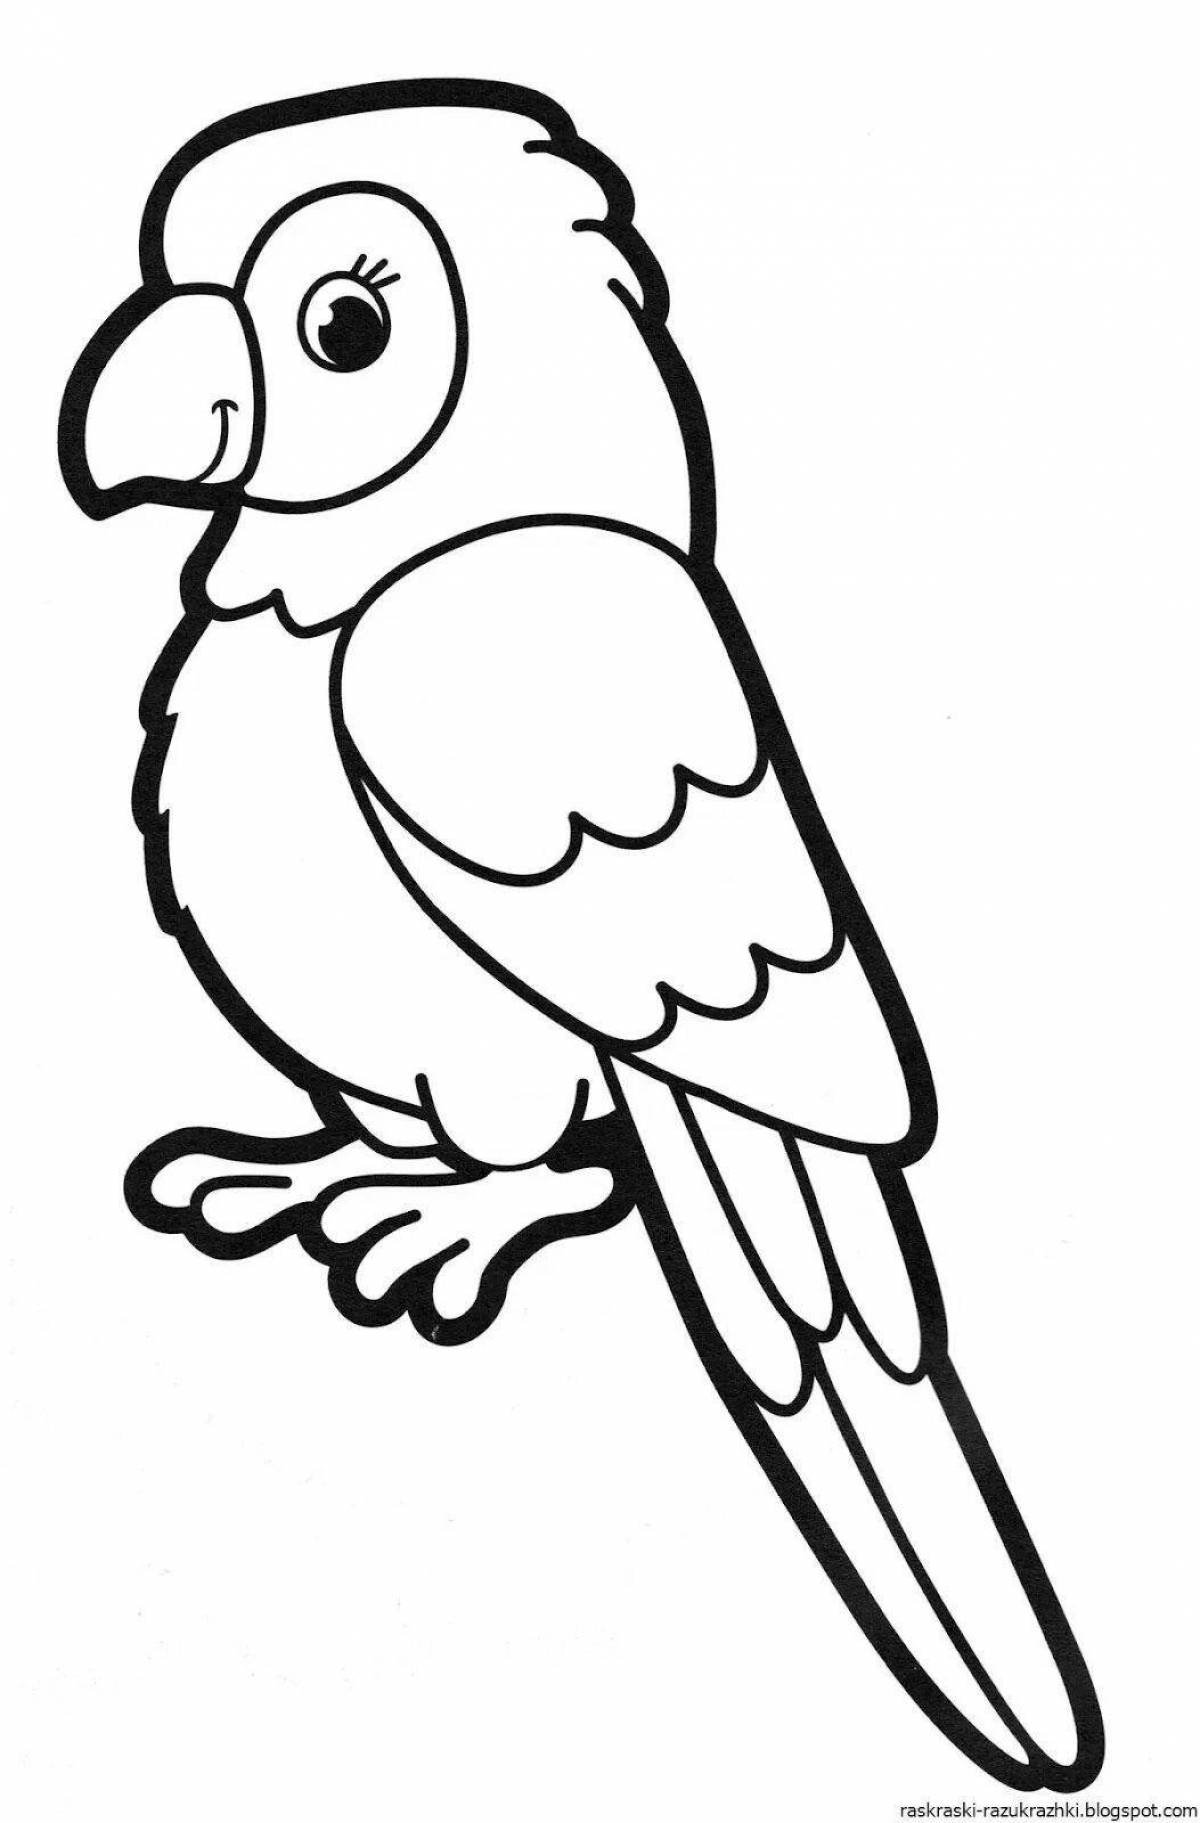 Exciting bird coloring book for 2-3 year olds